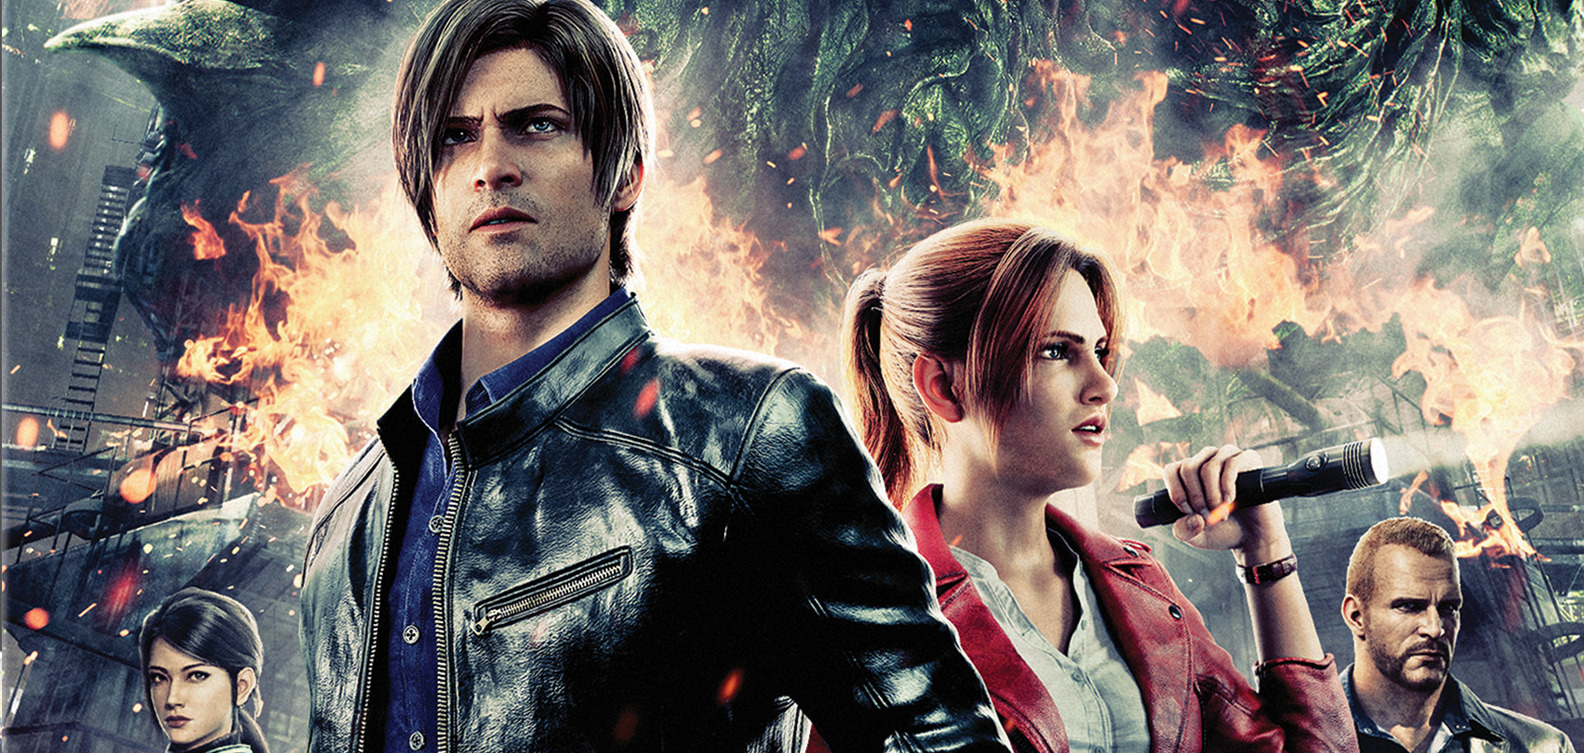 Resident Evil: Infinite Darkness': What Happens Next for Claire Redfield?